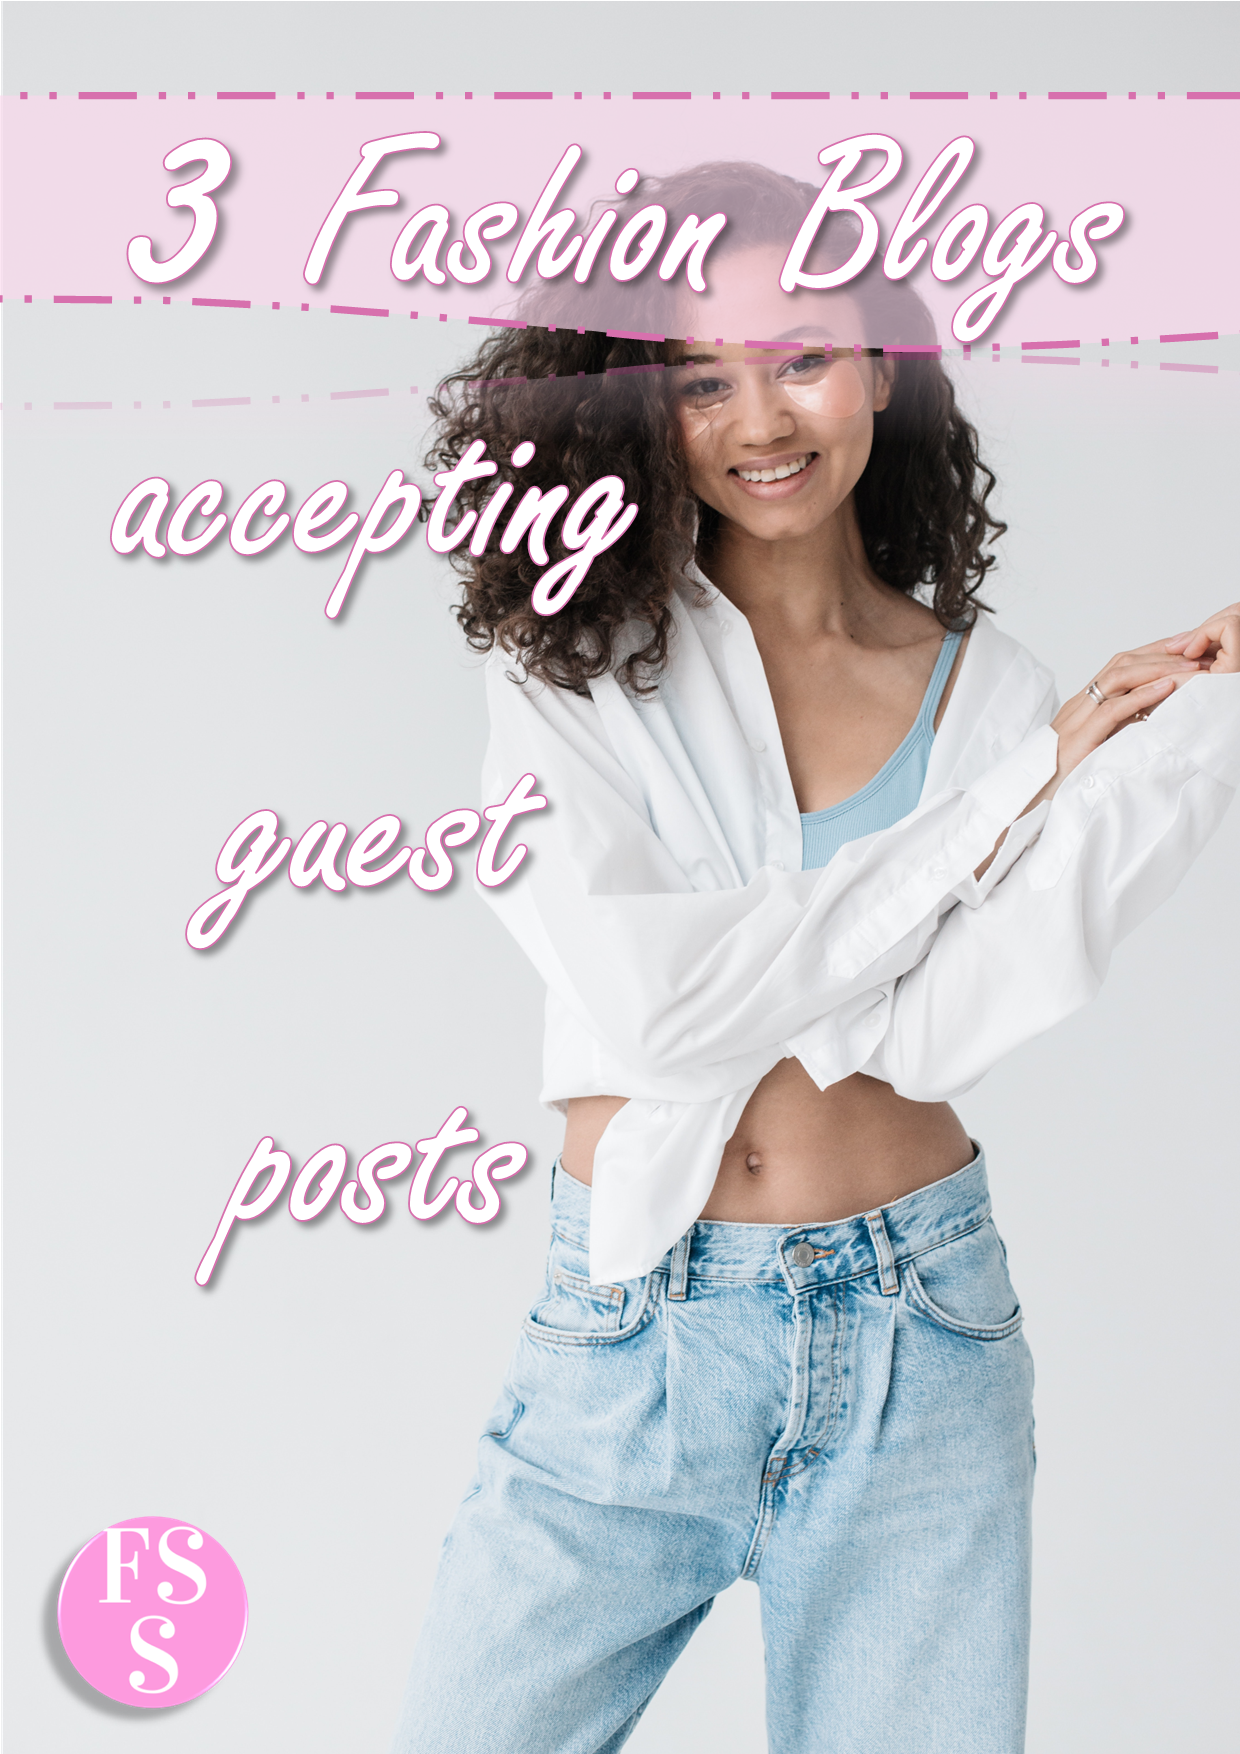 Write for us! We have 3 fashion blogs accepting guest posts & dozens of ideas just waiting for your take. Your fashion guest post will include SEO backlinks.
#freeguestpost #guestpostopportunities